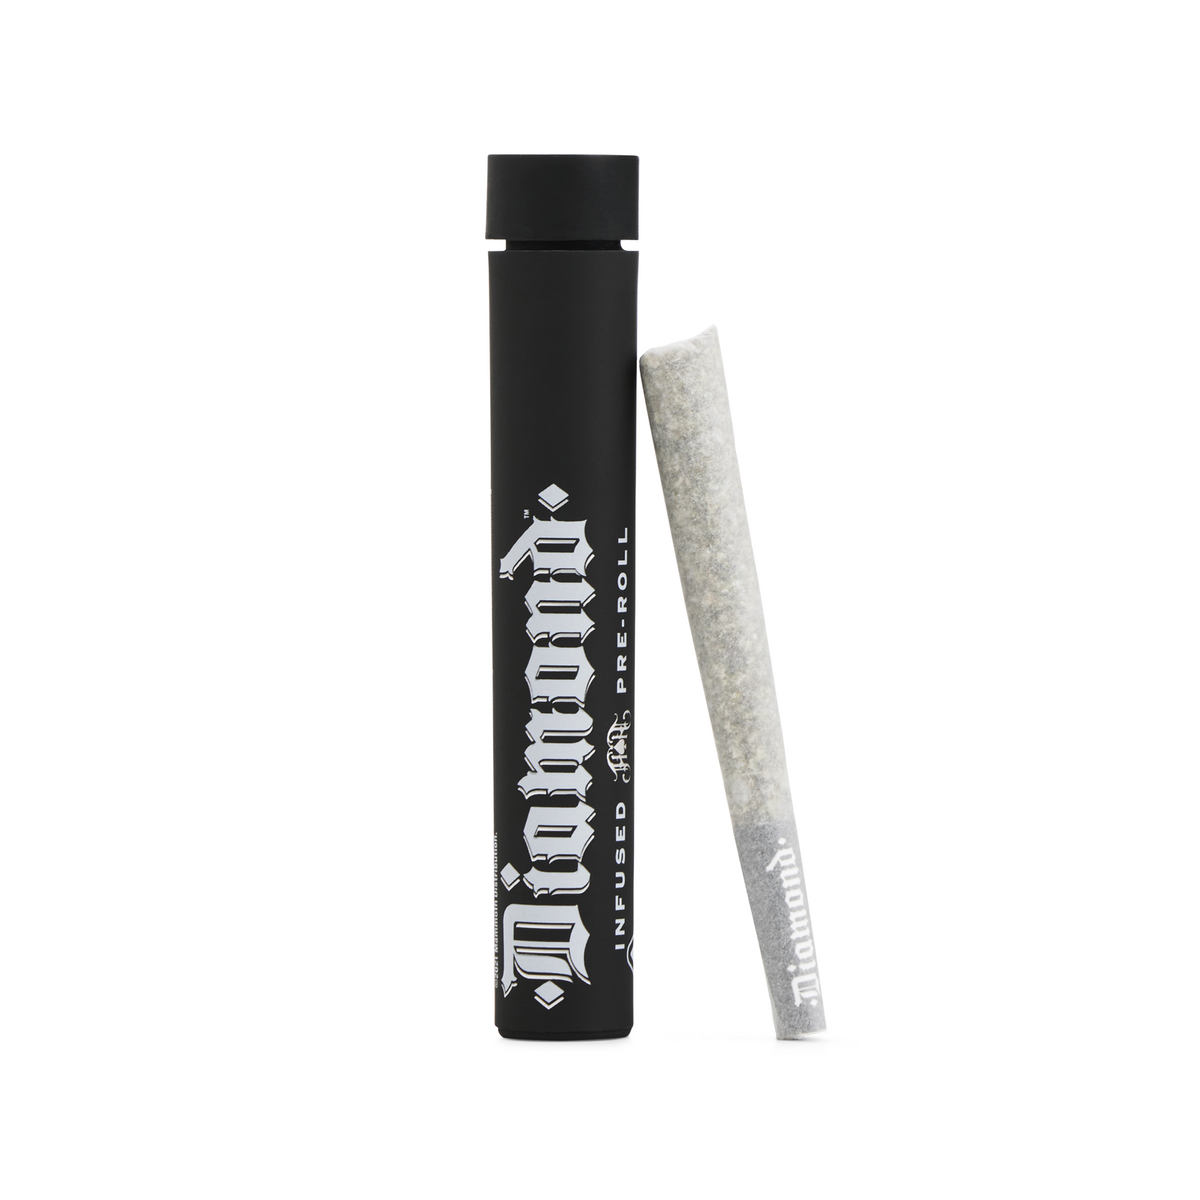 Raspberry Cough | Sativa - Diamond THCA-Infused Pre-Roll - 1G Joint